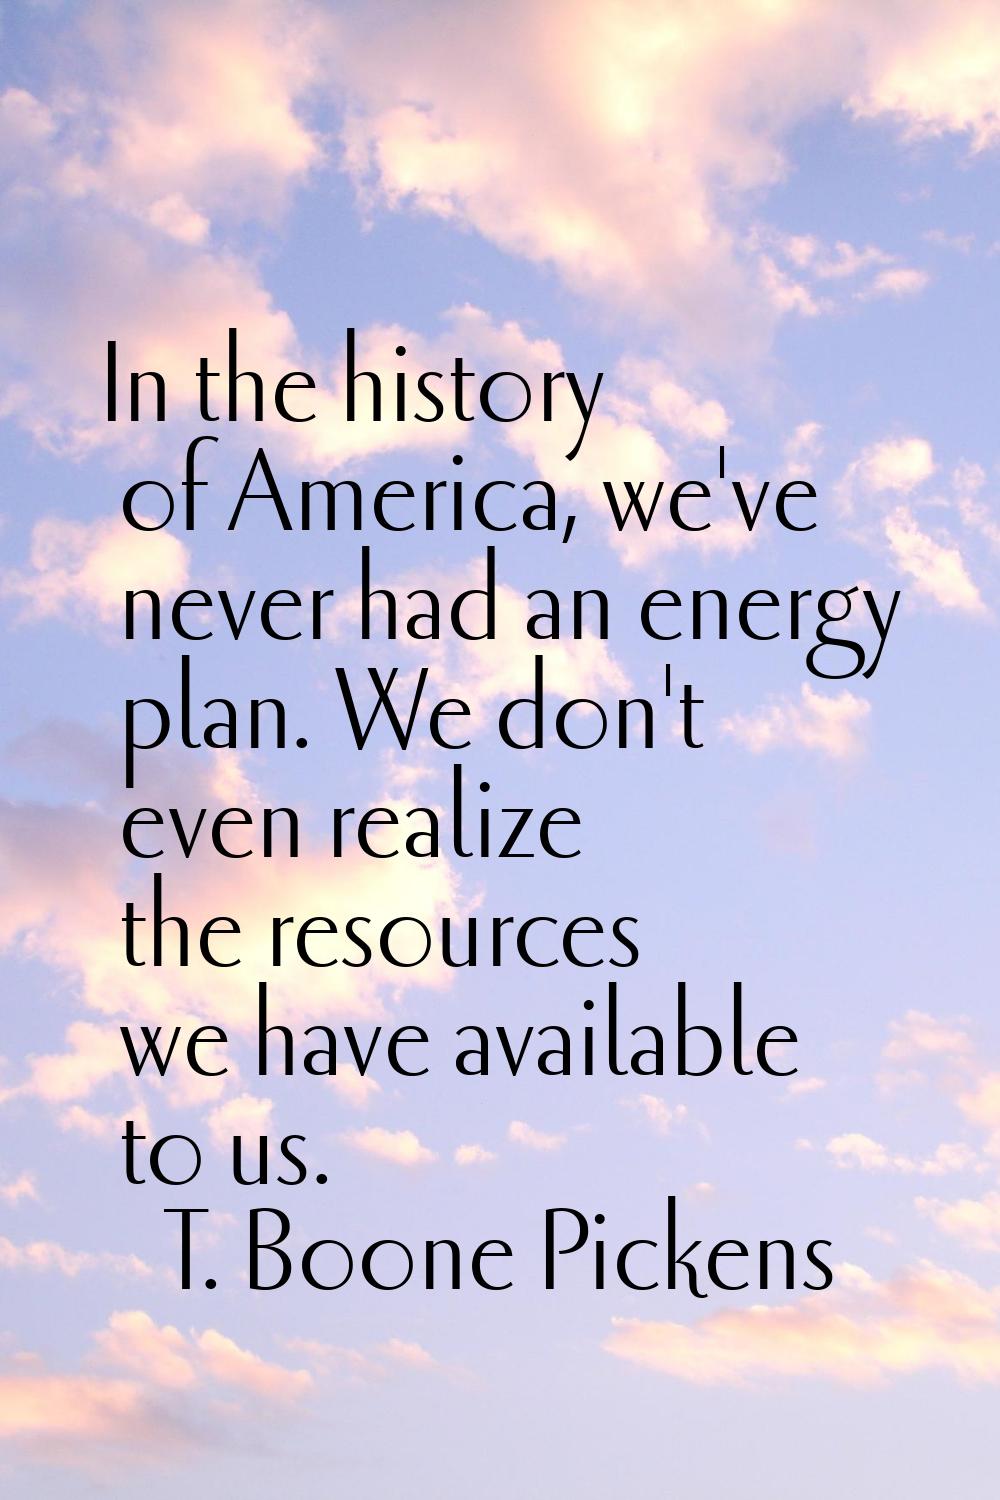 In the history of America, we've never had an energy plan. We don't even realize the resources we h